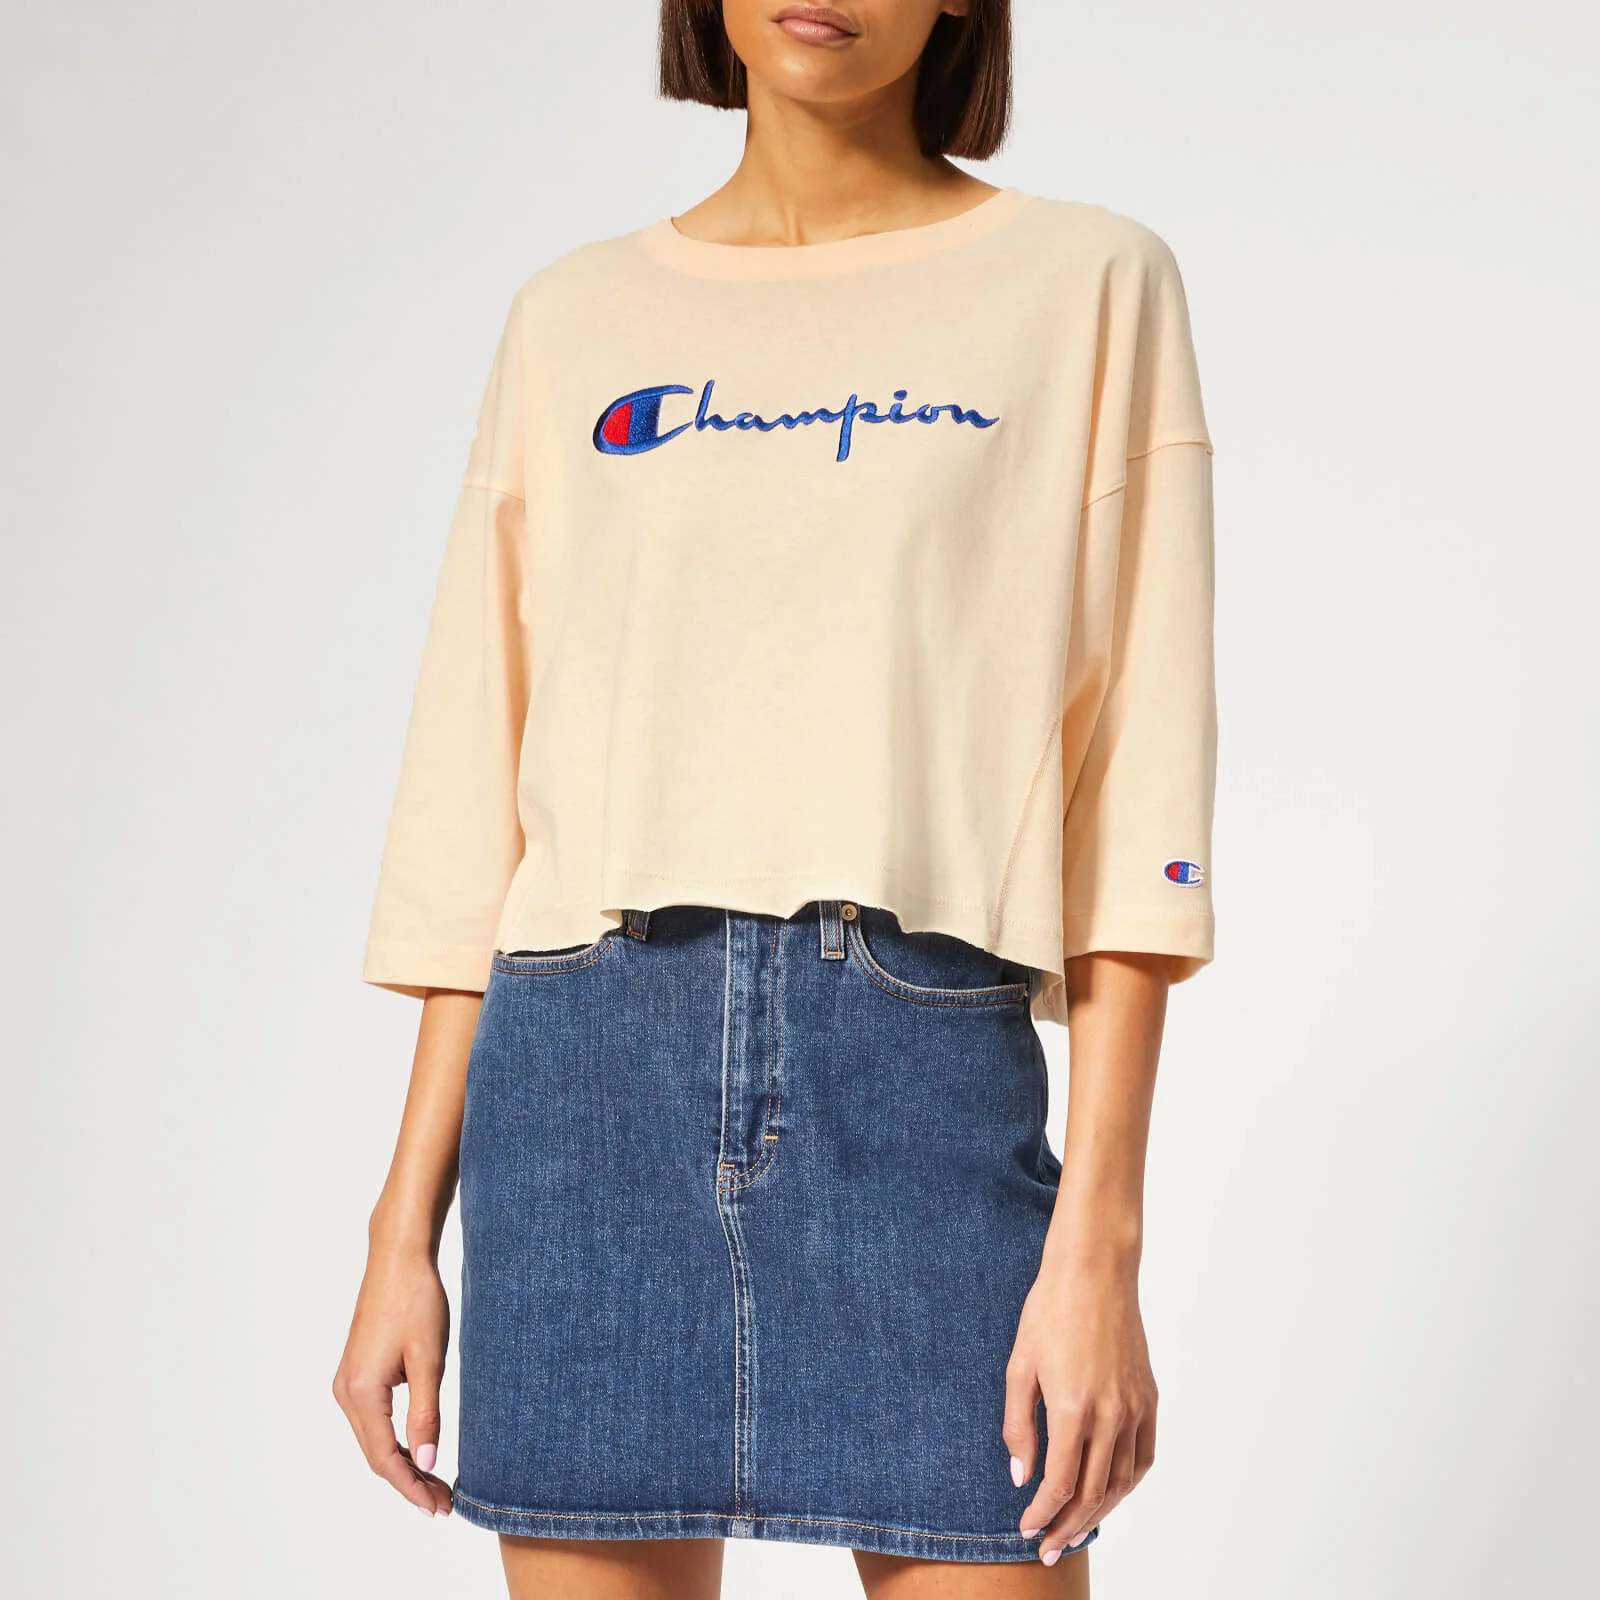 Champion Women's Cropped 3/4 Sleeve Top - Pink Image 1